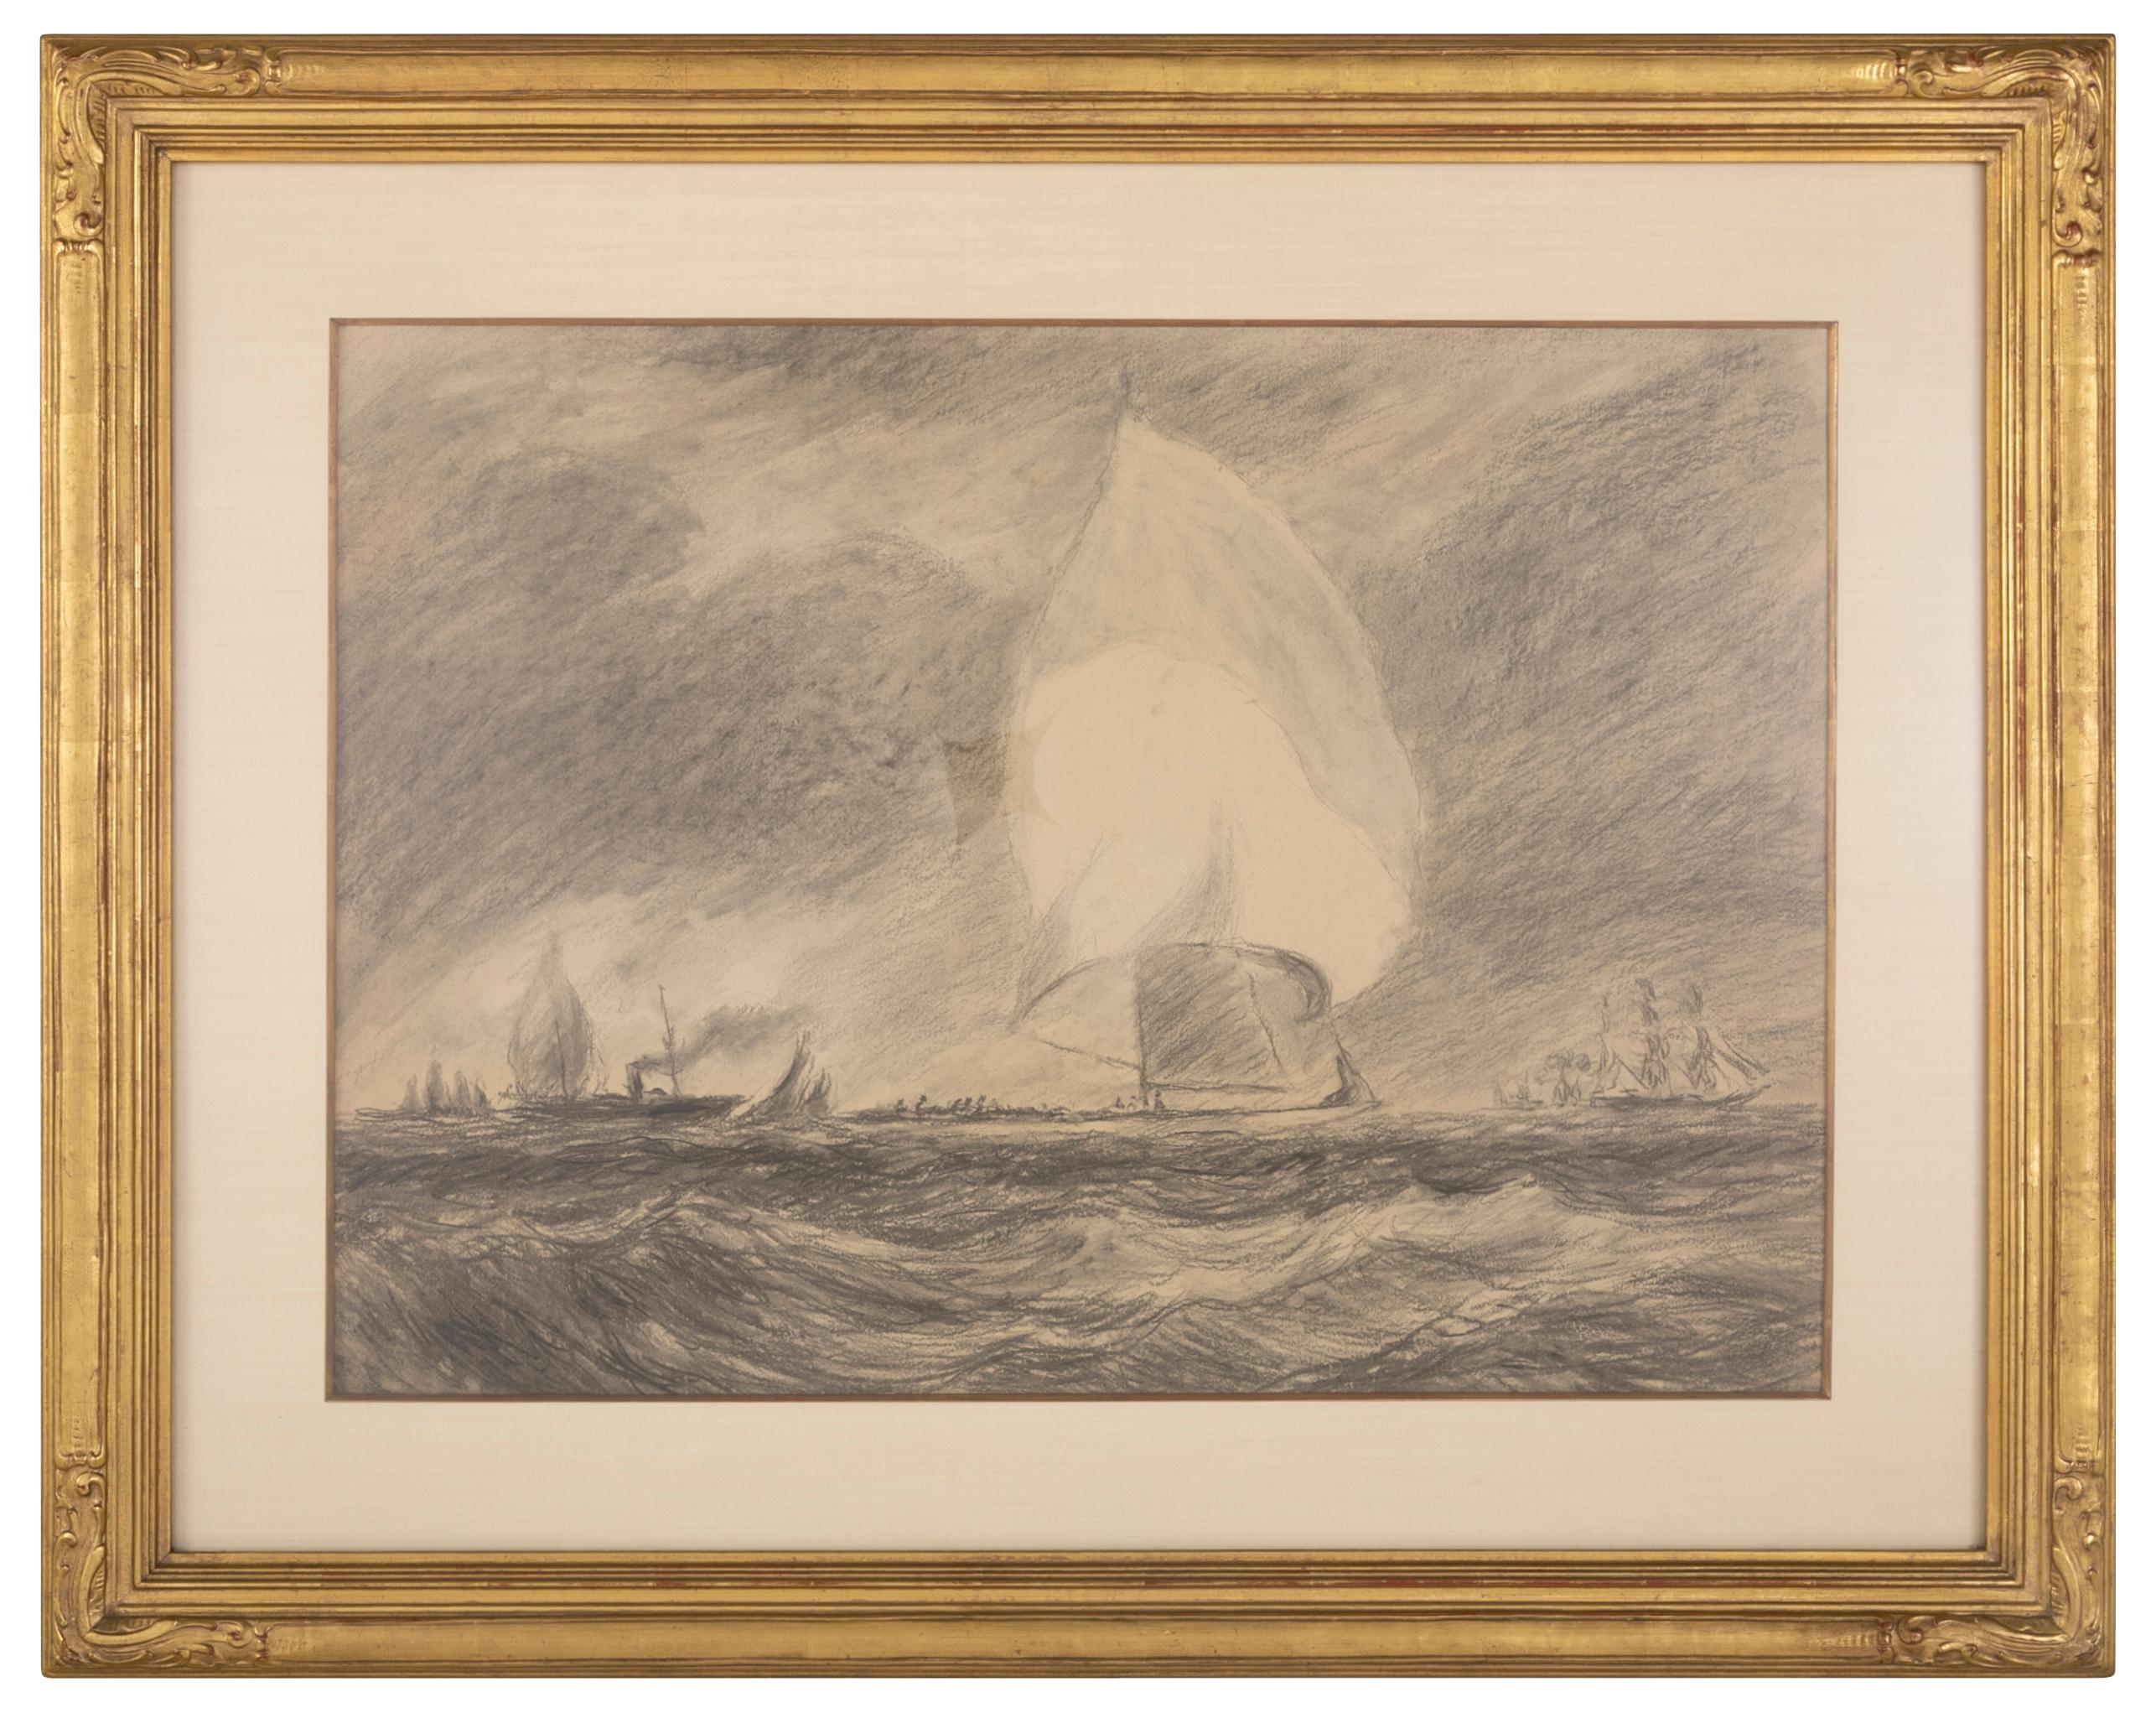 Outstanding pair of charcoal and crayon sketches by Reynolds Beal for his large America's Cup race paintings; circa 1930. Beal (1867-1951) was a famous American Impressionist painter known for his sailing and fishing paintings. He sketched as he